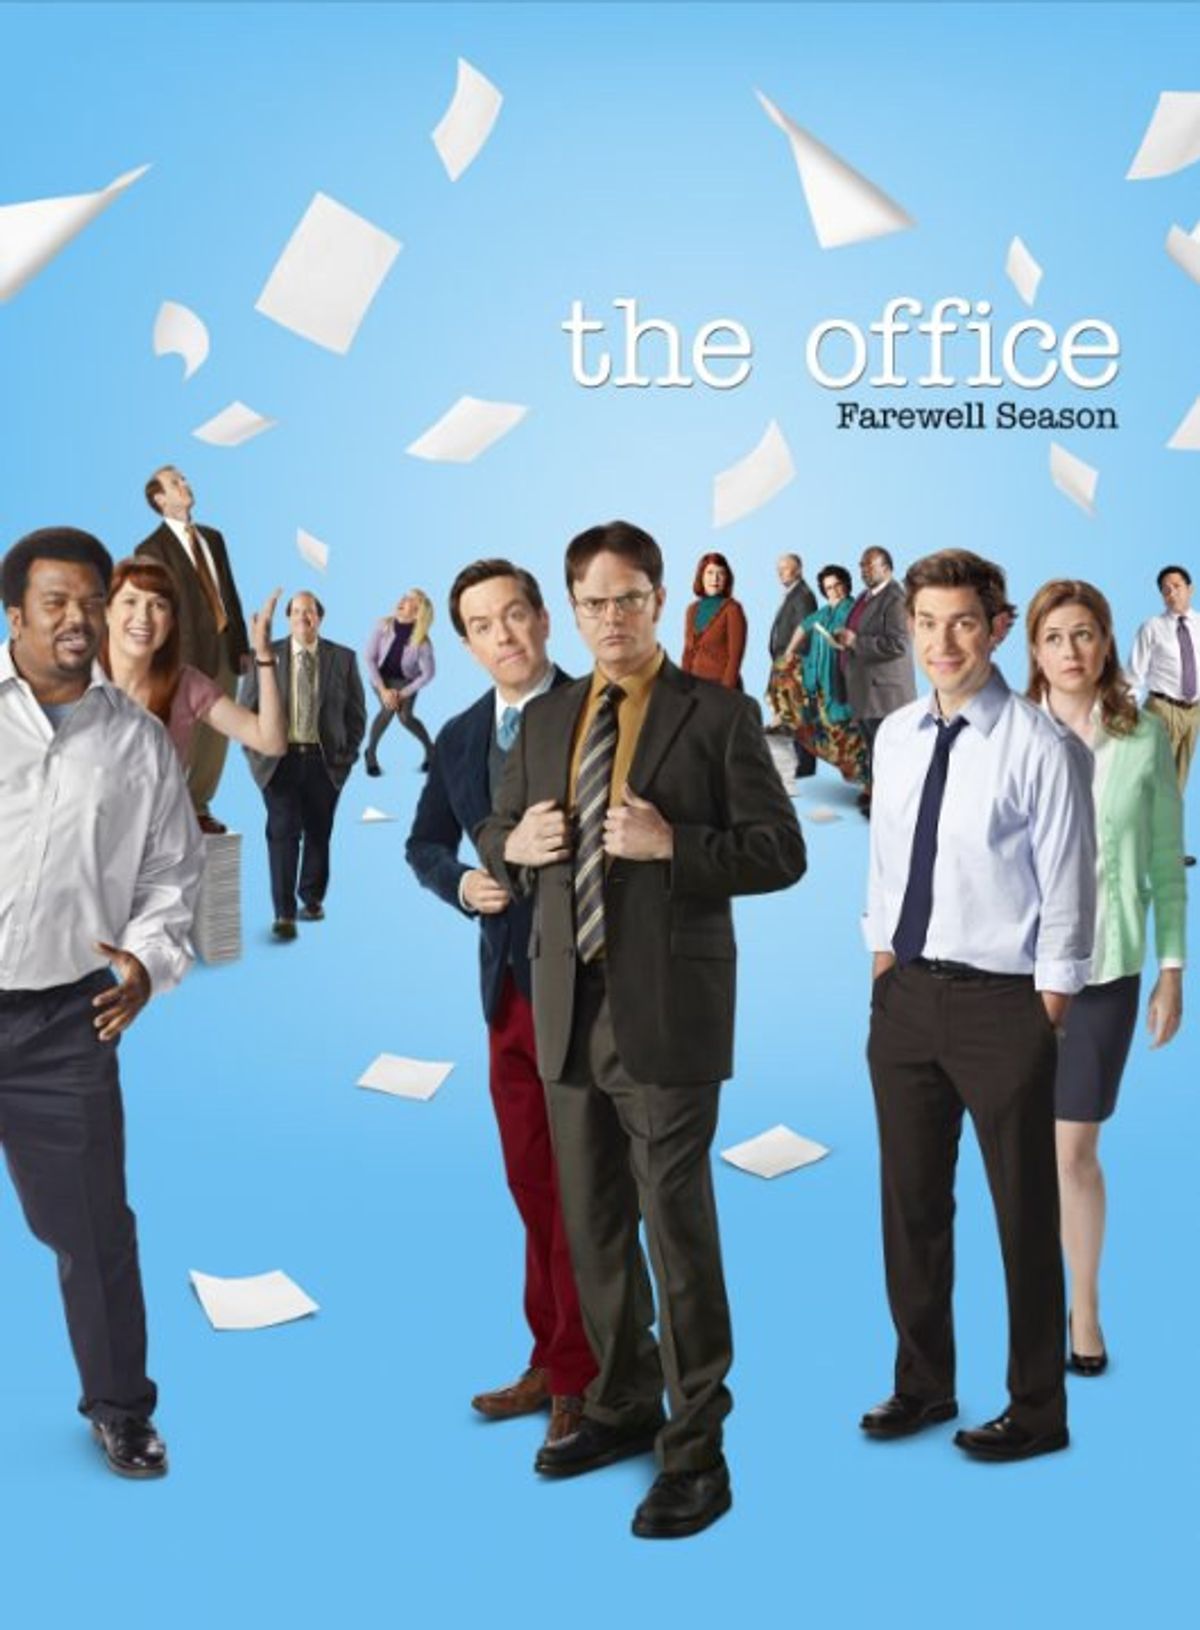 March In College, As Told By The Office